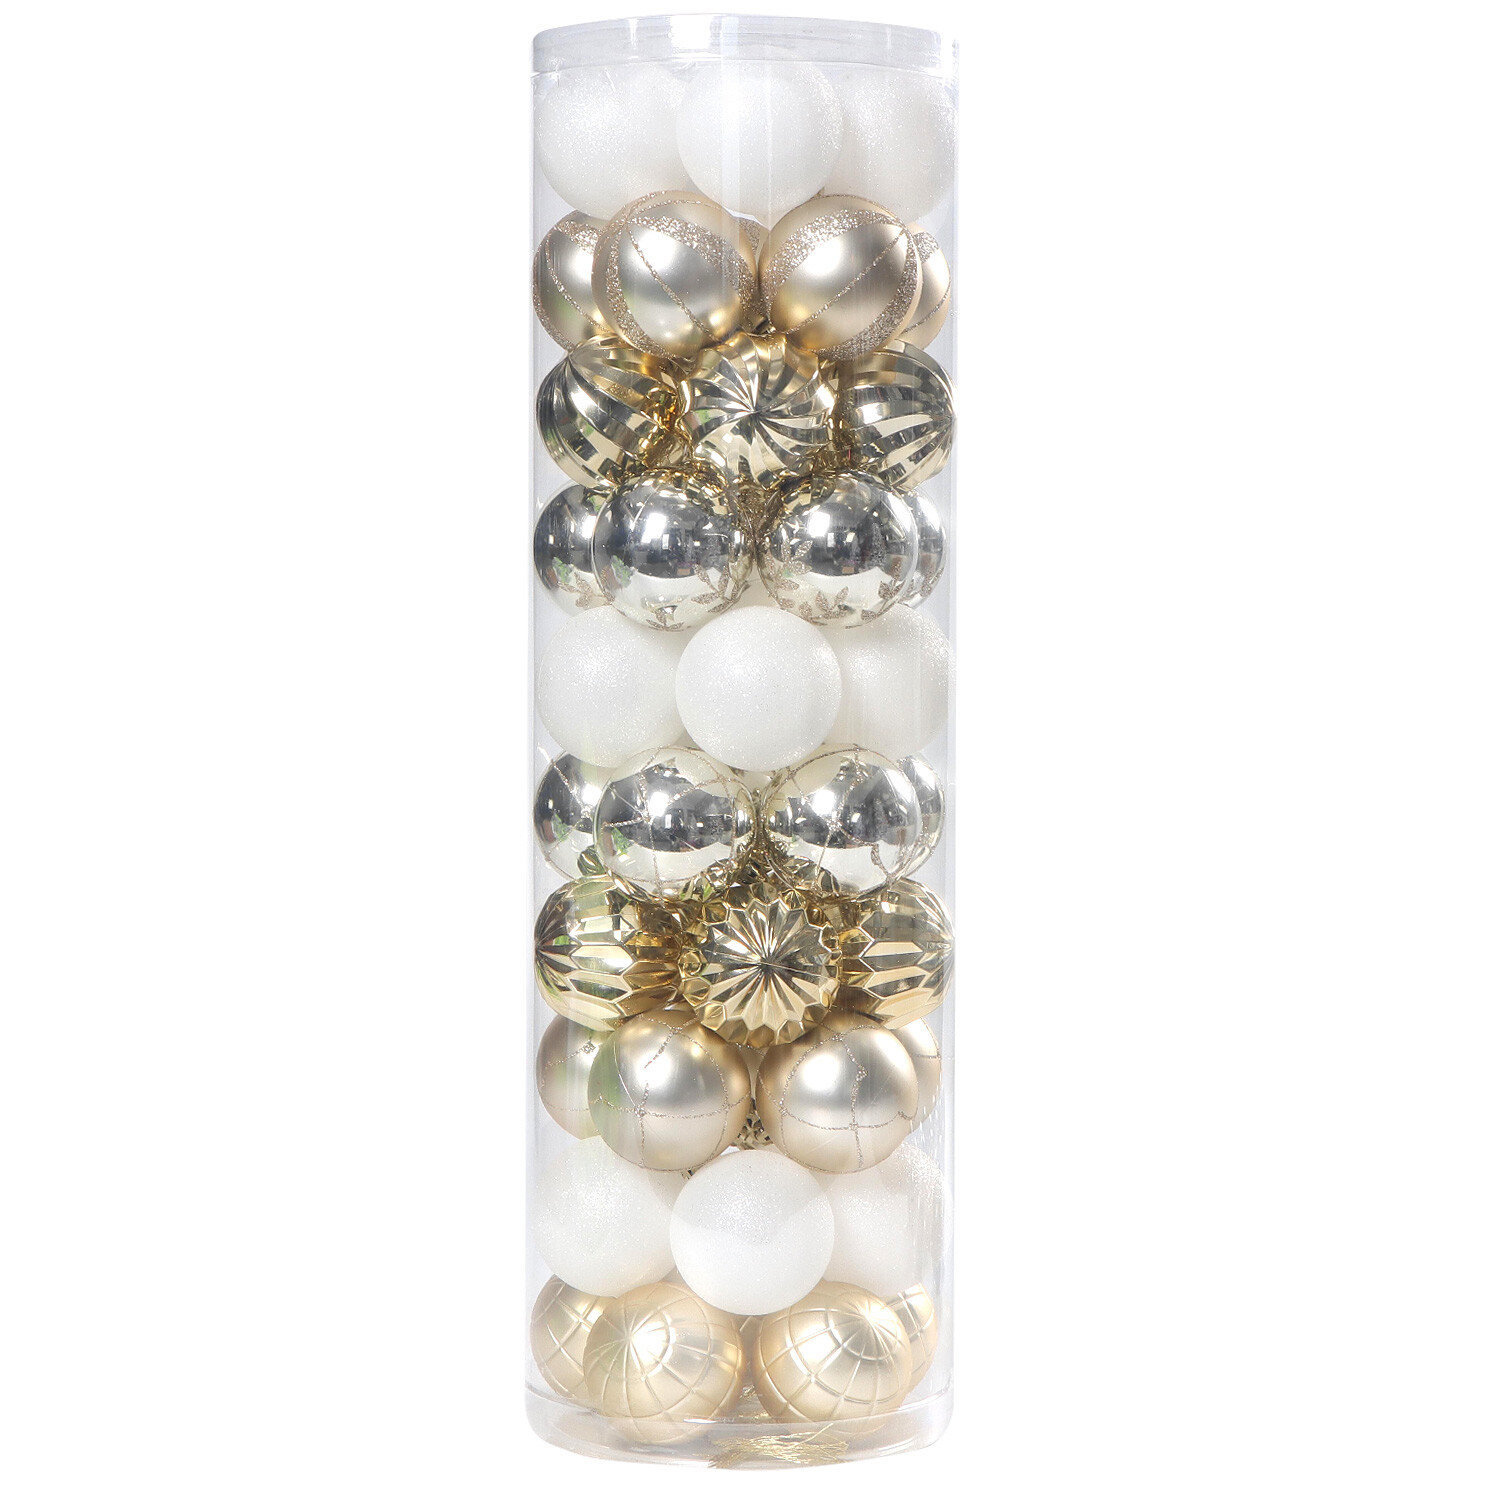 Pack of 50 Chic Noir Baubles - Gold Image